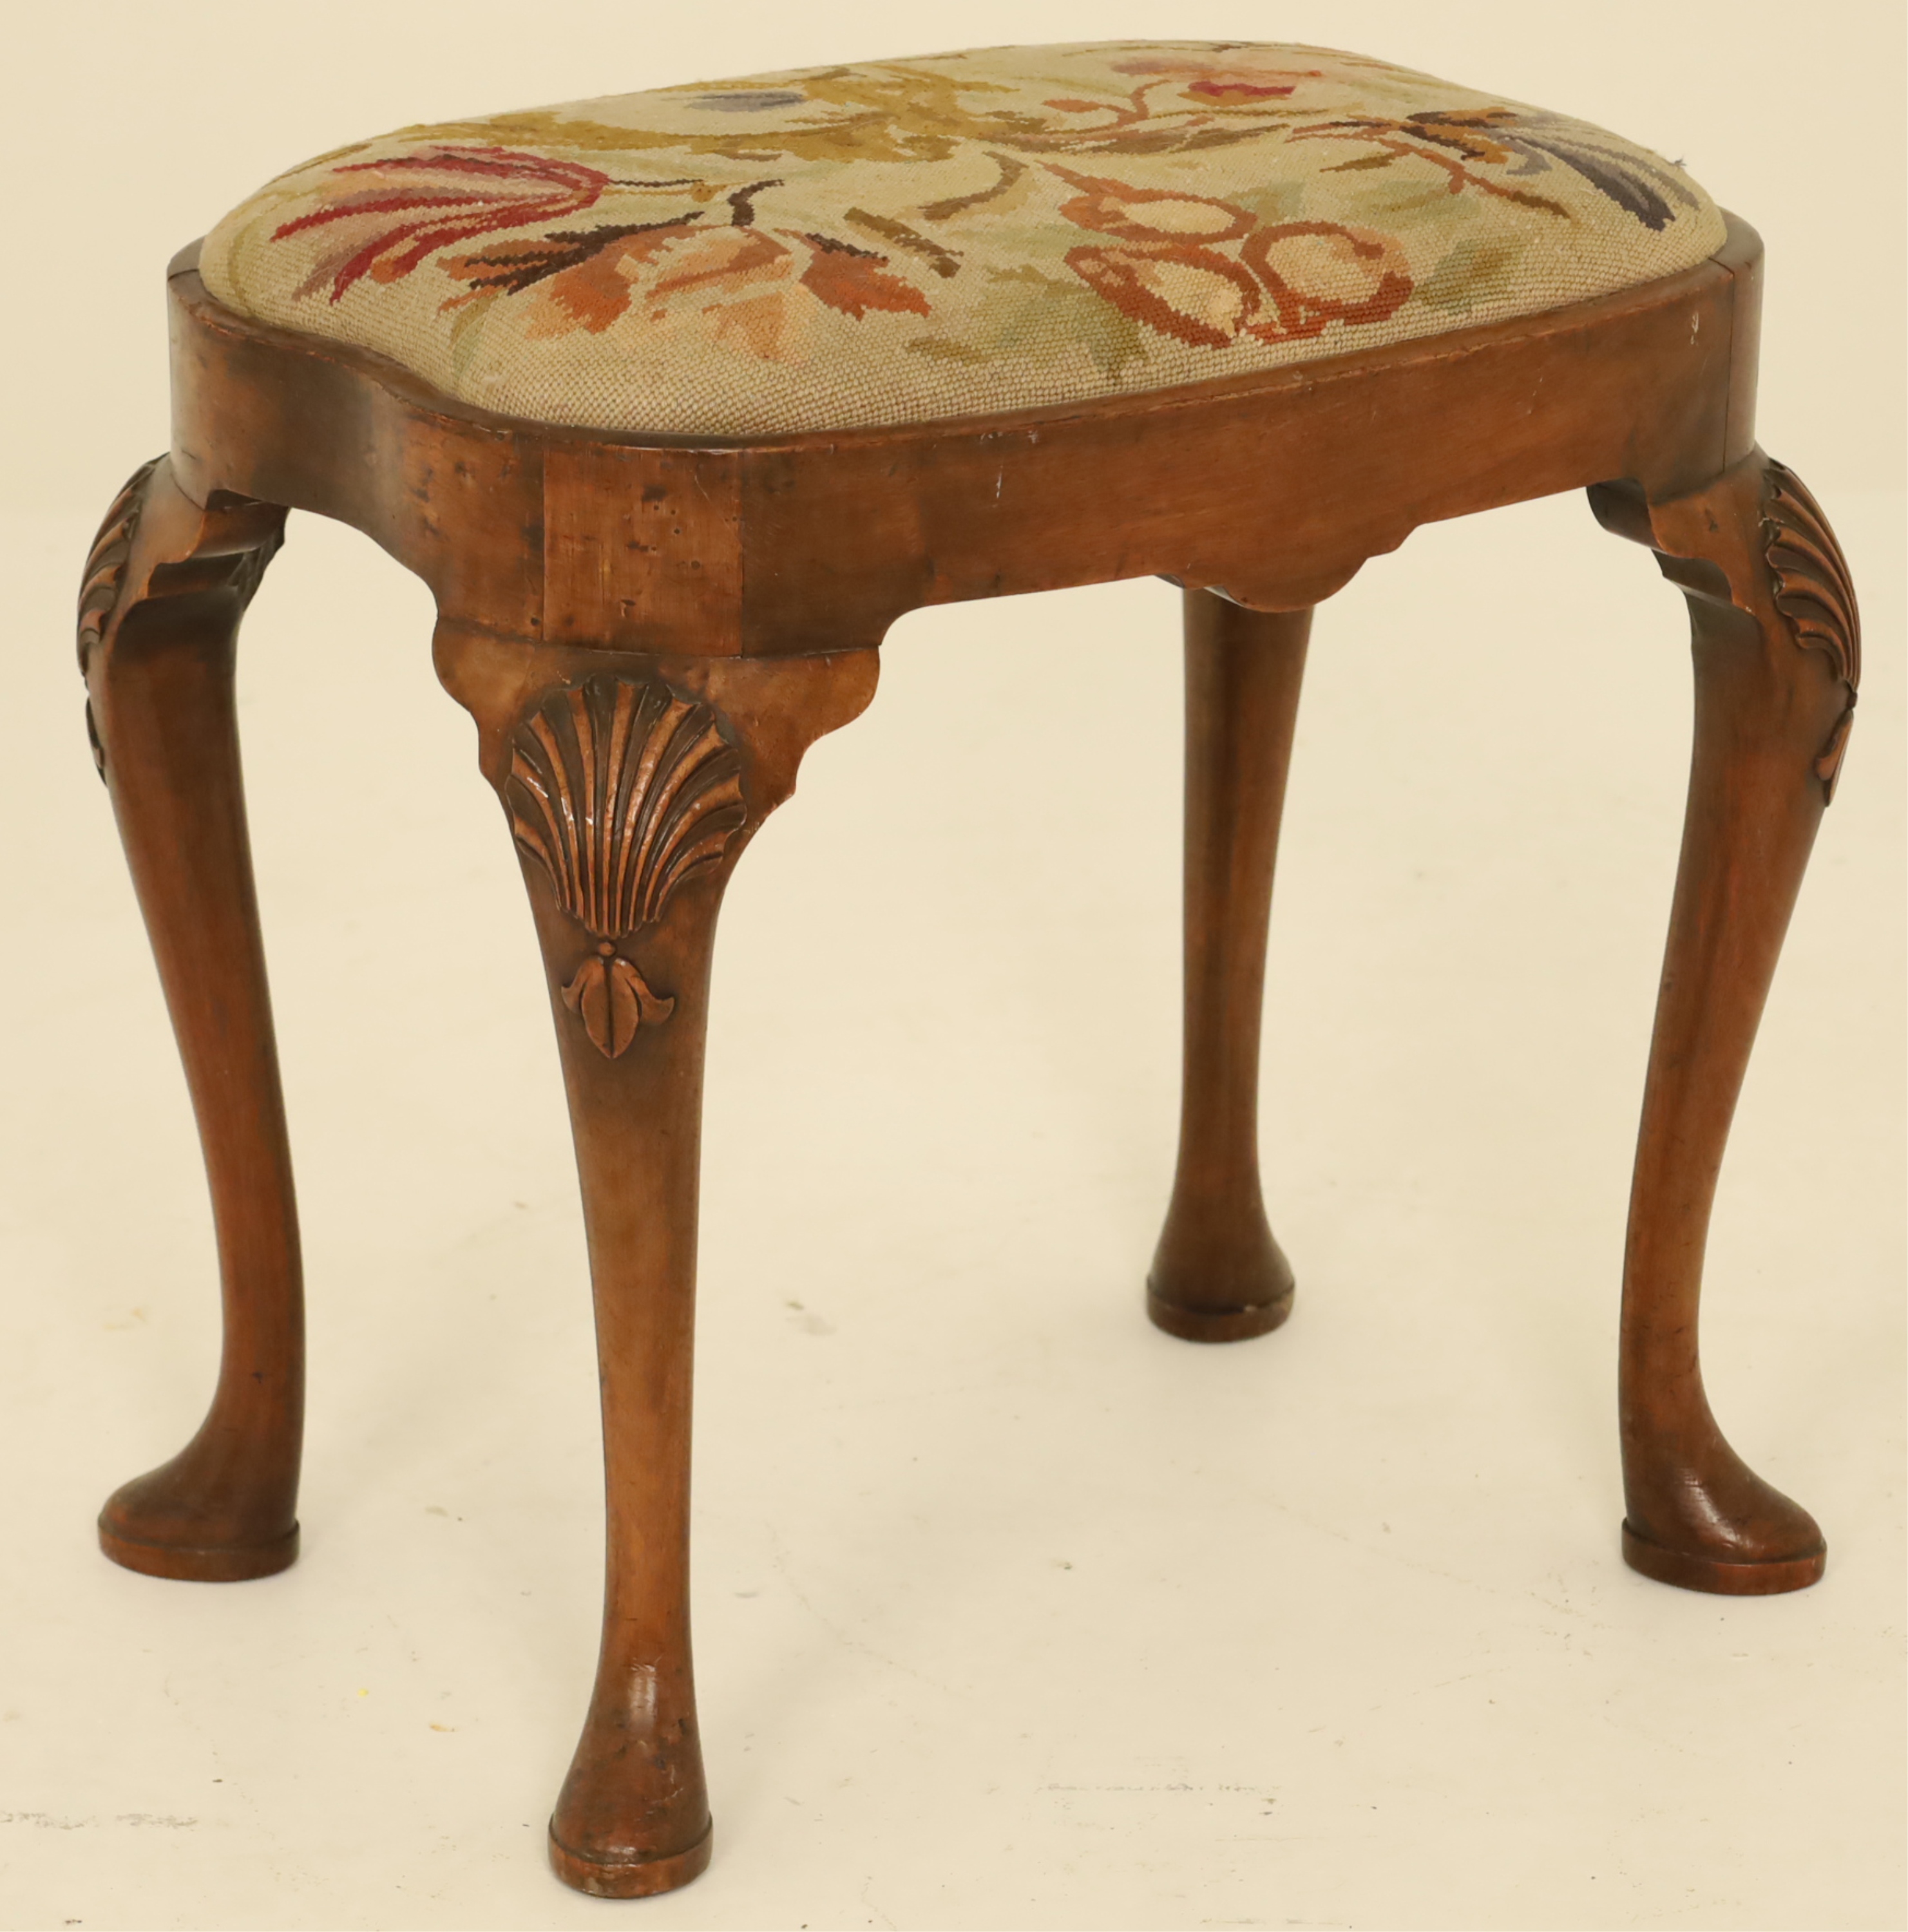 19TH C QUEEN ANNE STYLE STOOL 2b7990